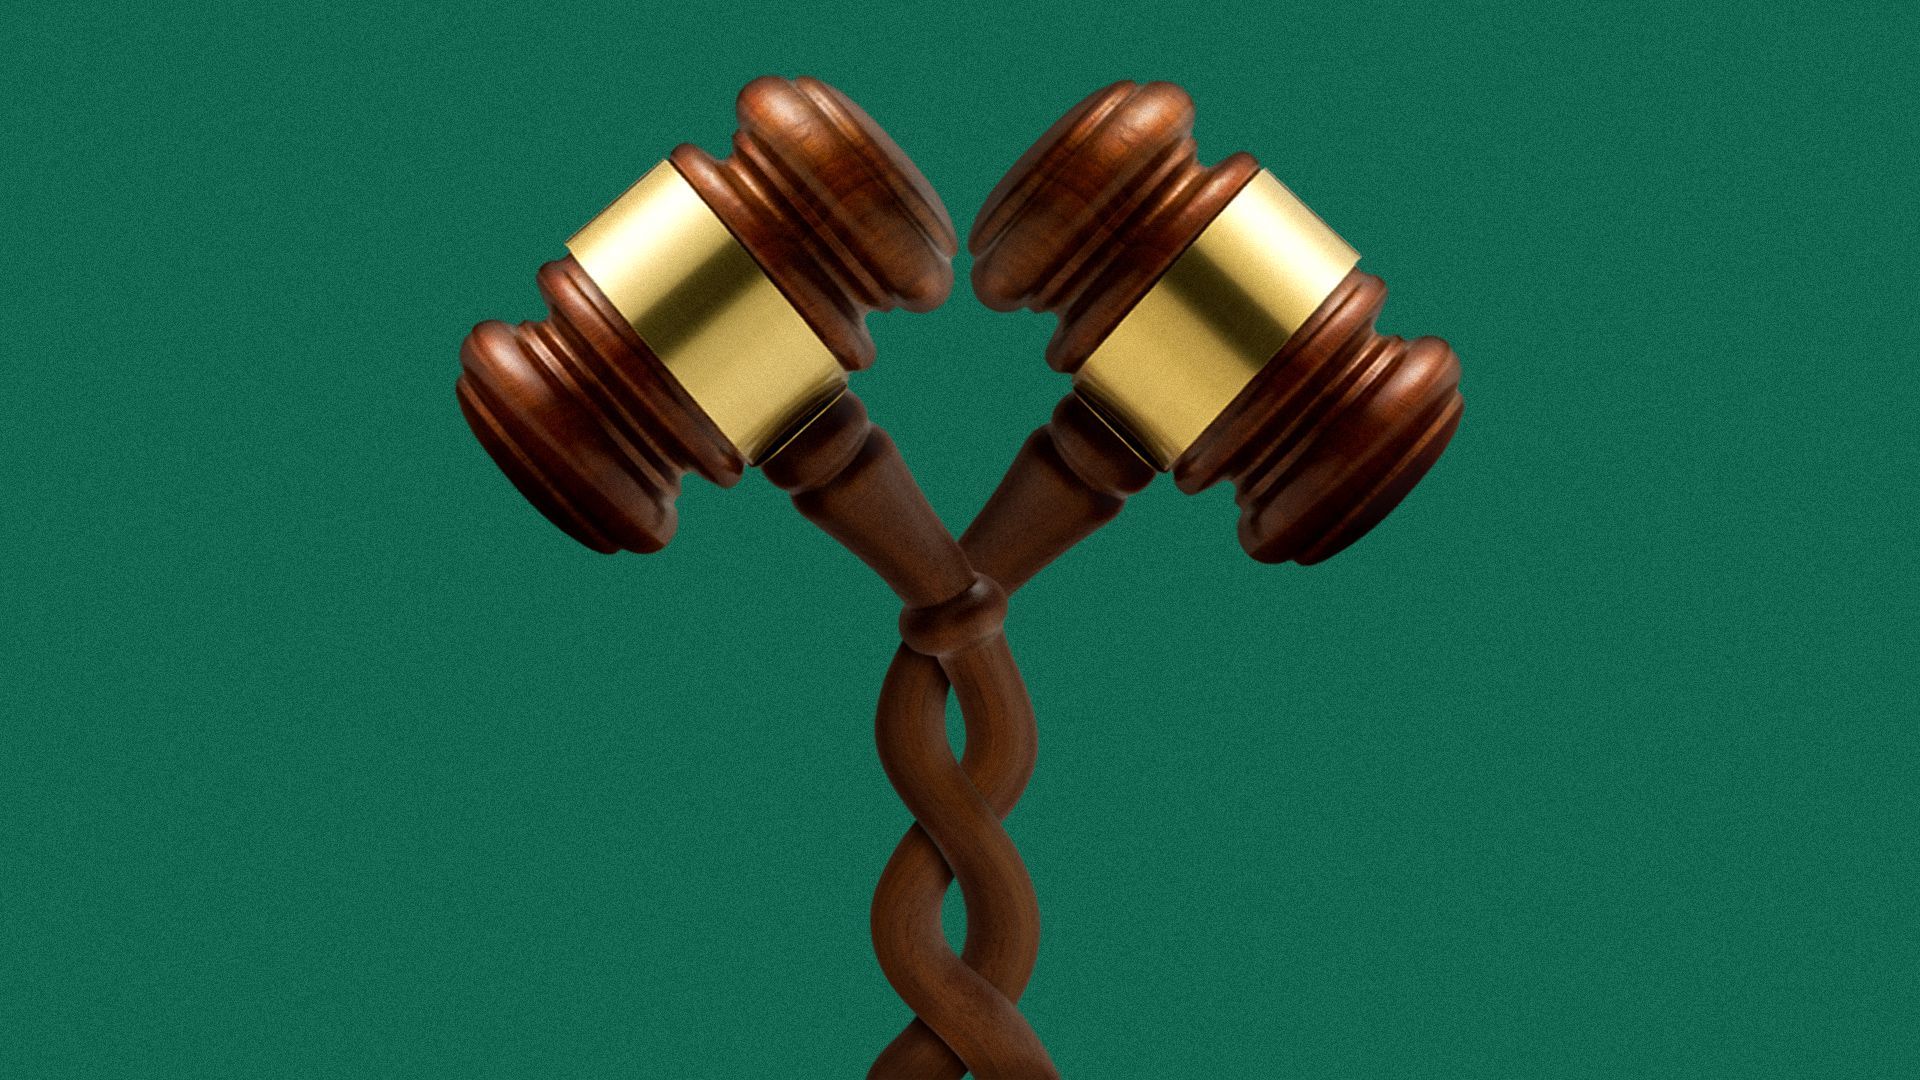 Illustration of two intertwined gavels.